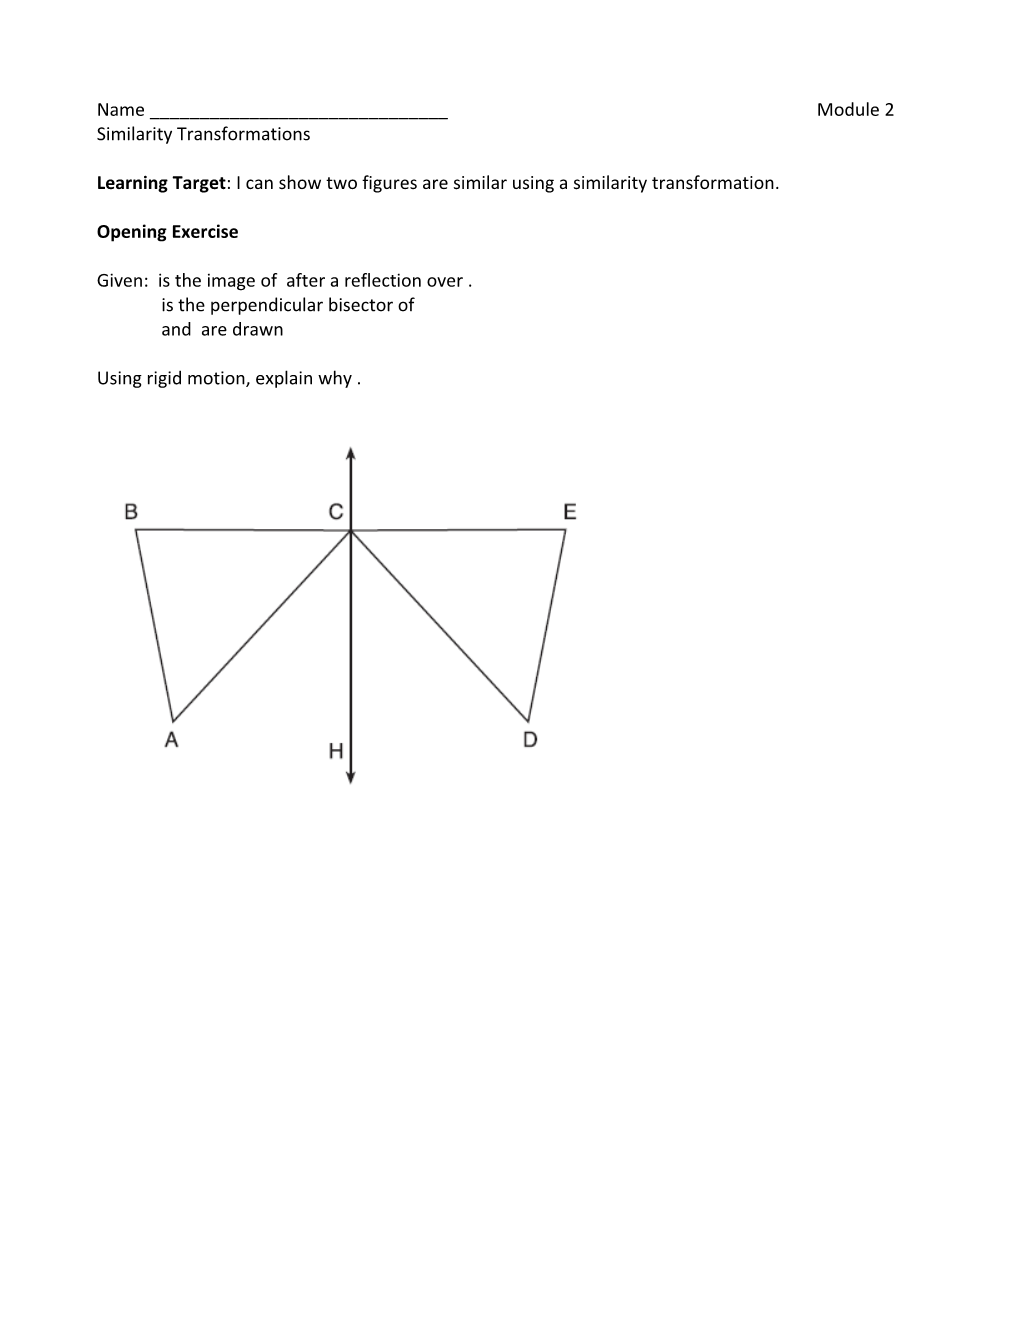 Learning Target: I Can Show Two Figures Are Similar Using a Similarity Transformation